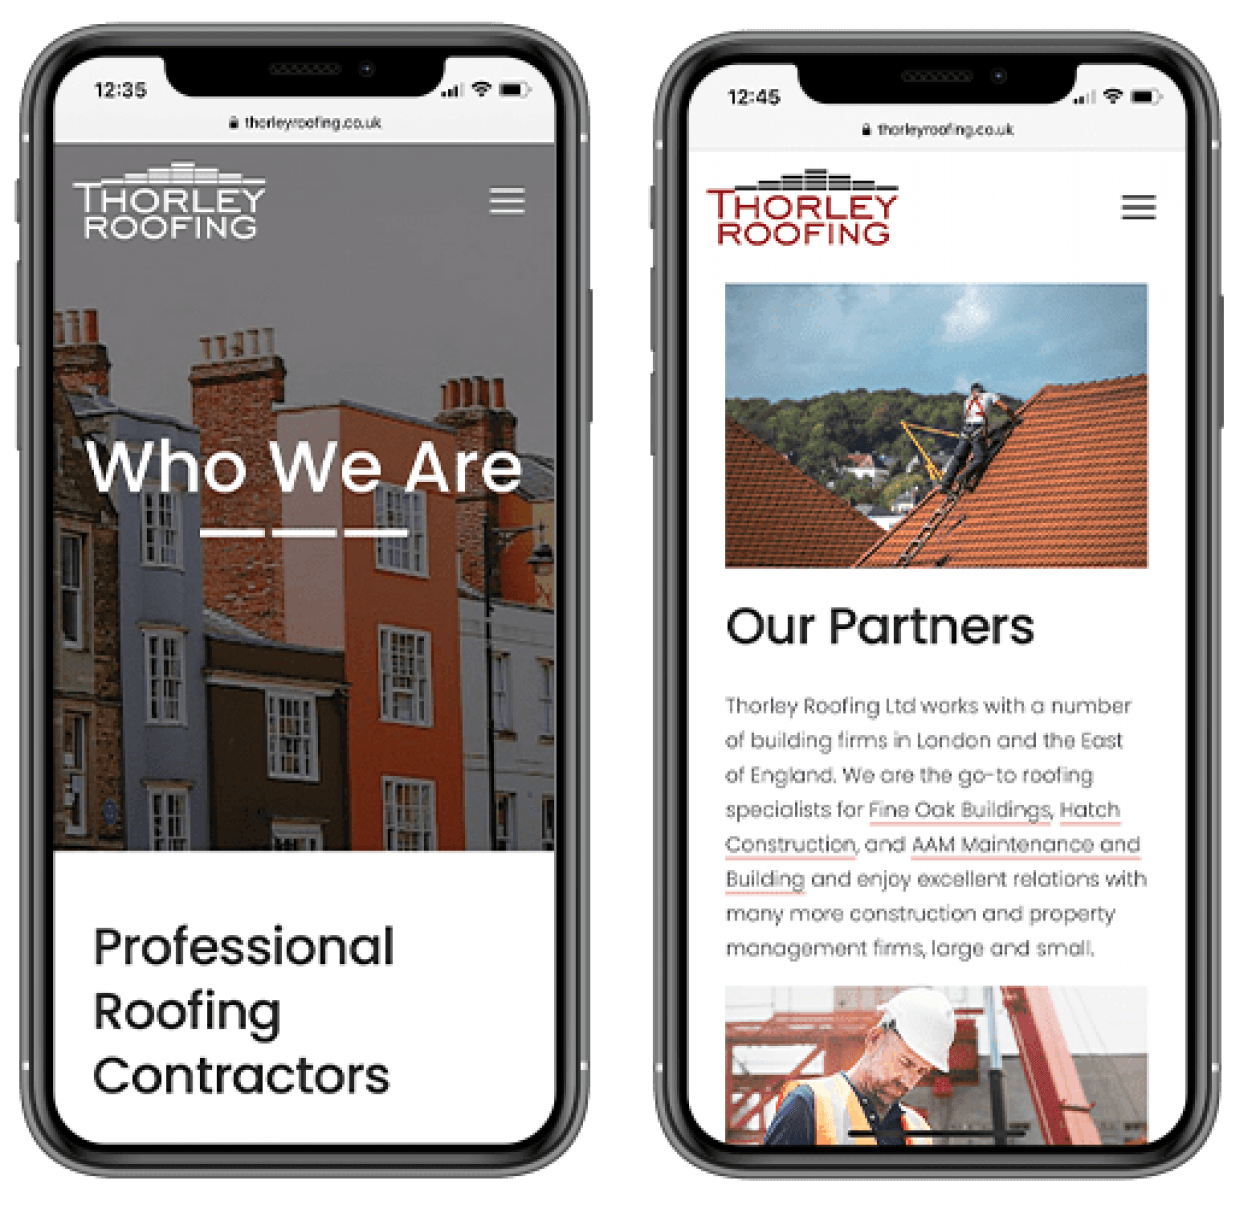 Thorley roofing